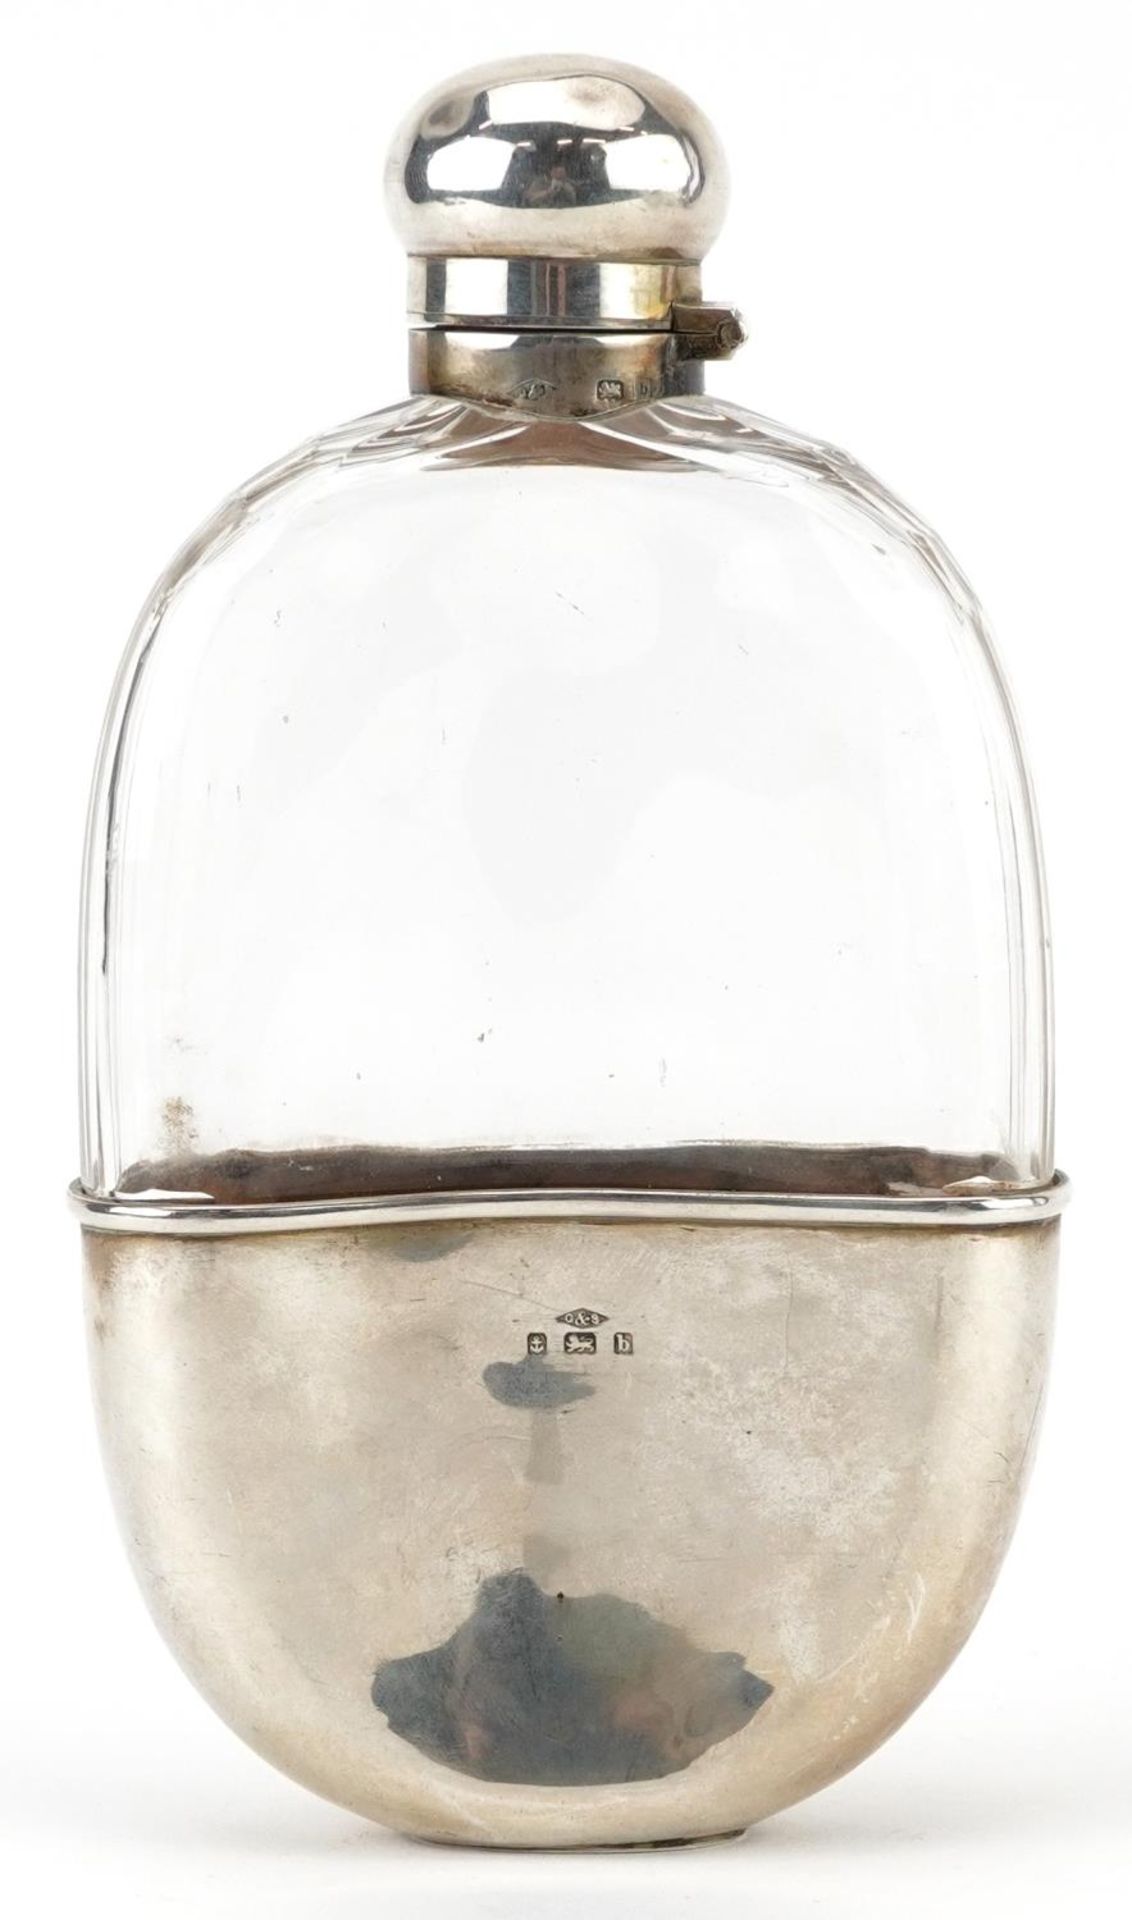 Griffiths & Singleton, Edwardian silver mounted glass hip flask with detachable cup, Birmingham - Image 2 of 4